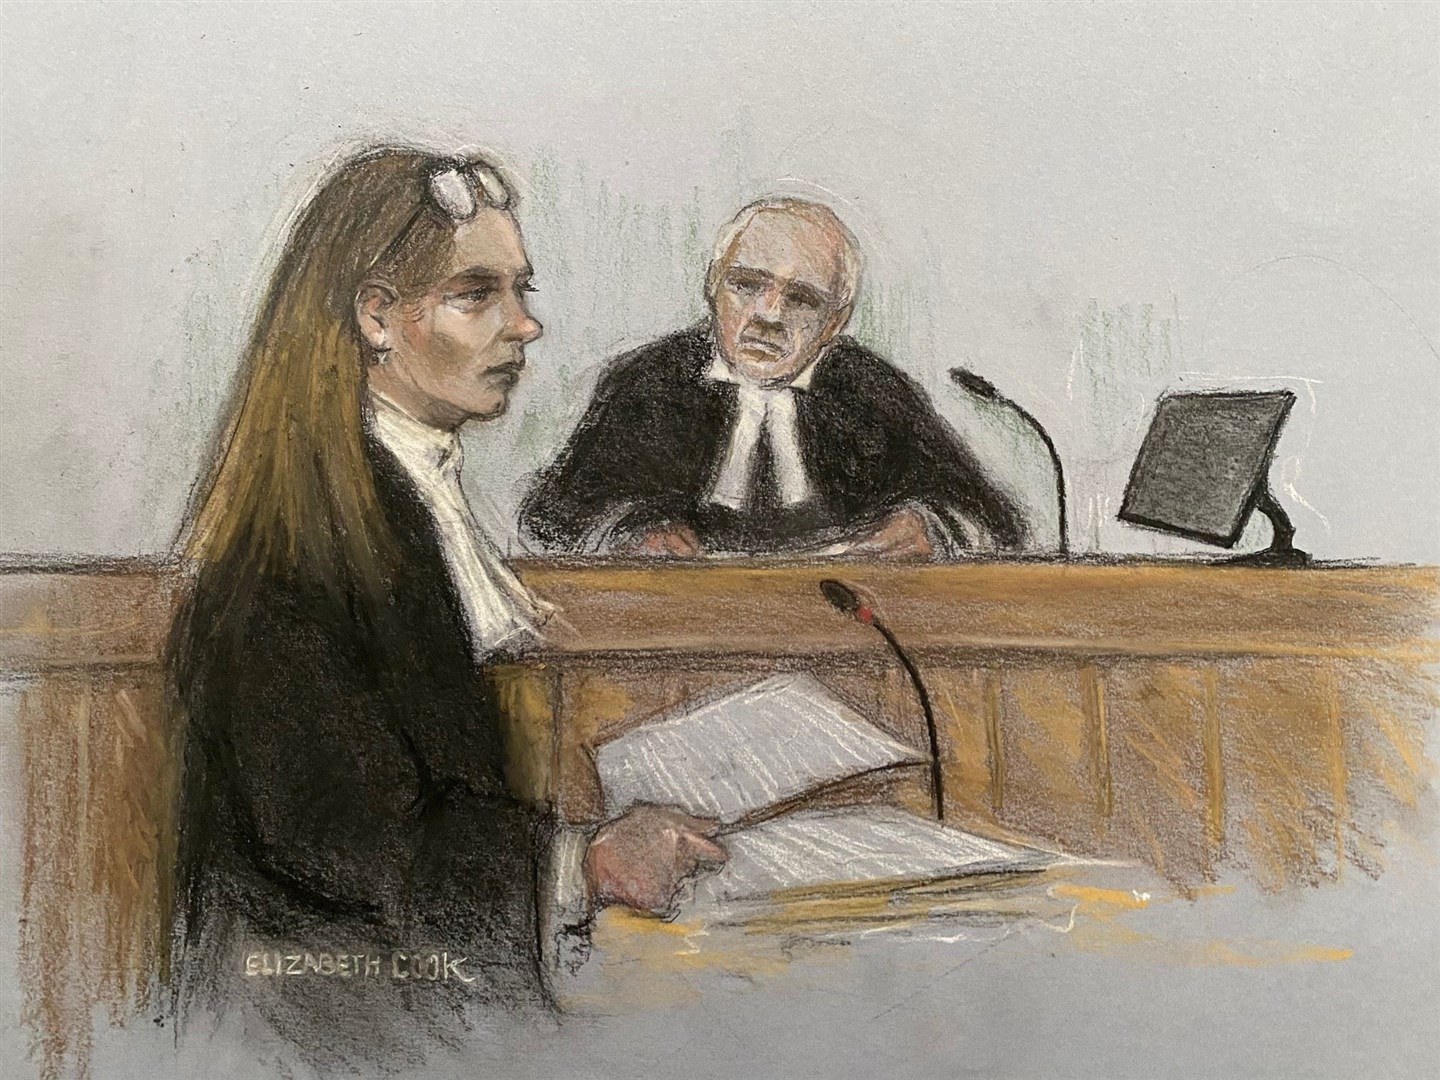 Prosecuting barrister Anne-Marie Lawlor’s case was that there was no other man involved in the killing (Elizabeth Cook/PA)